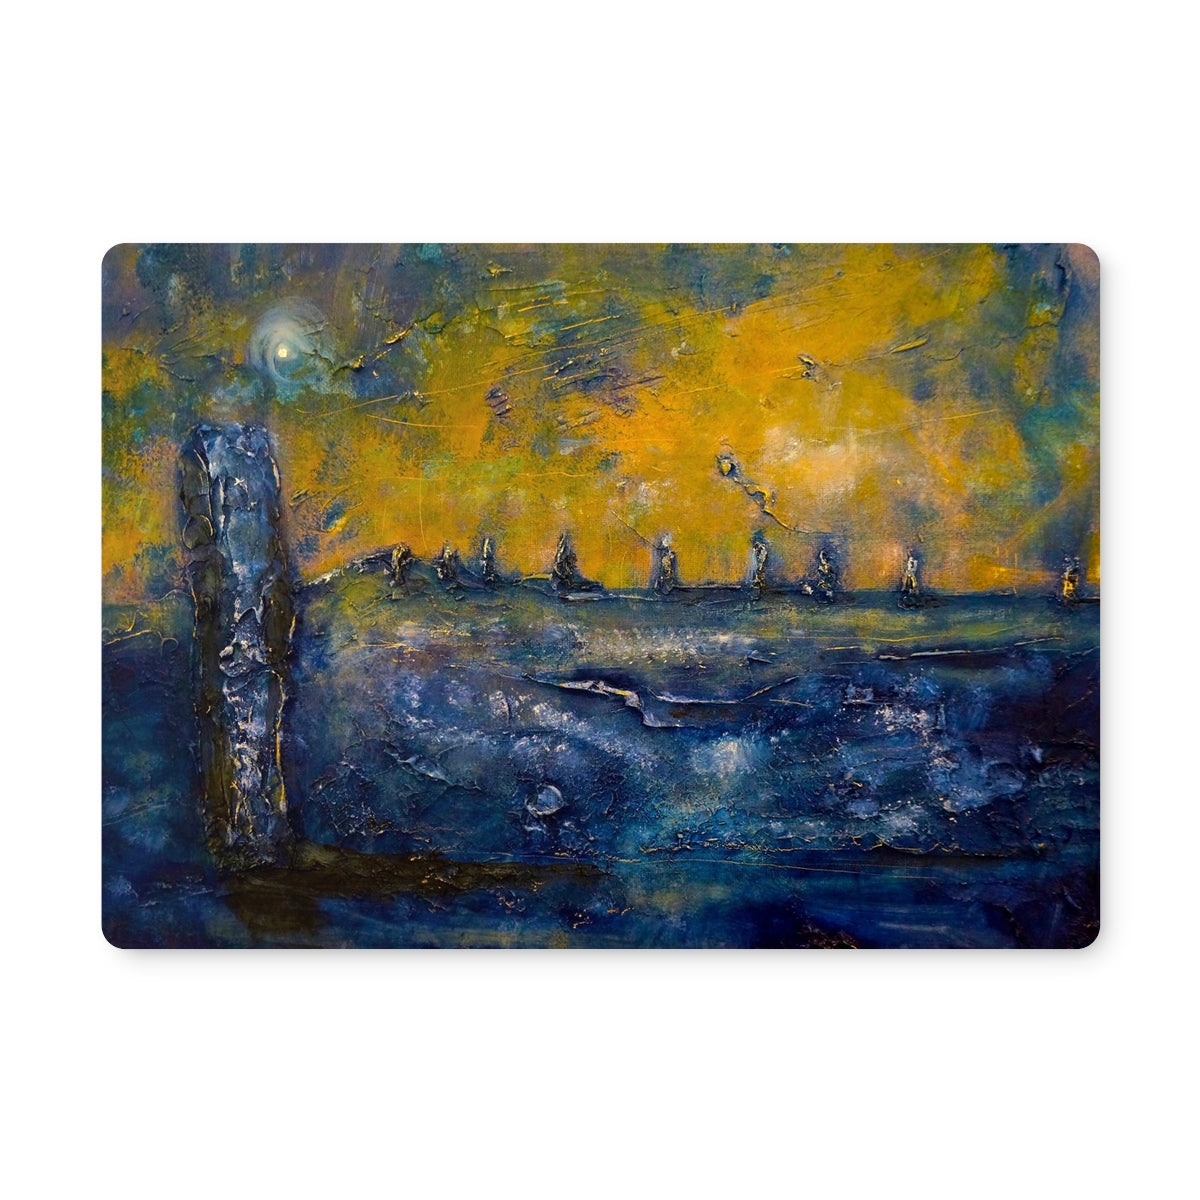 Brodgar Moonlight Orkney Art Gifts Placemat-Placemats-Orkney Art Gallery-2 Placemats-Paintings, Prints, Homeware, Art Gifts From Scotland By Scottish Artist Kevin Hunter